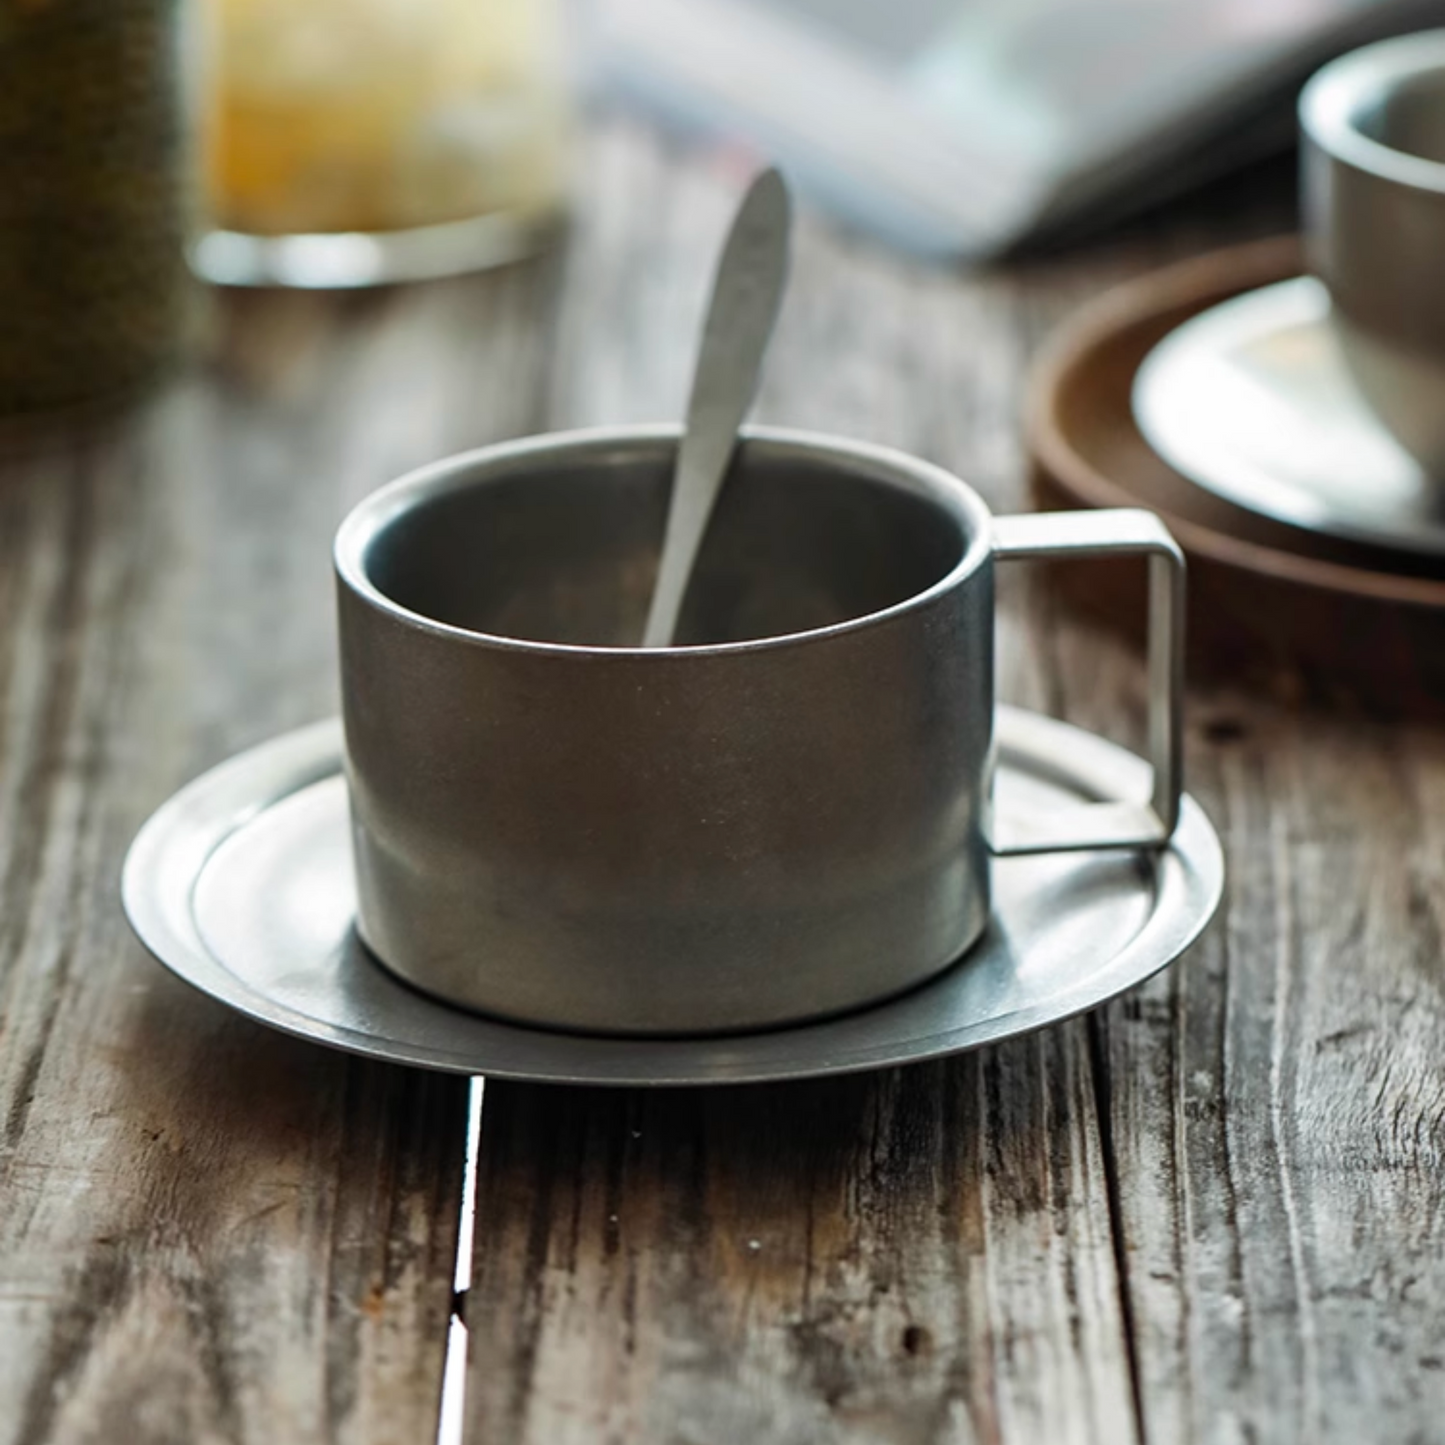 Retro Steel Coffee Cup with Saucer and Spoon (200ml)